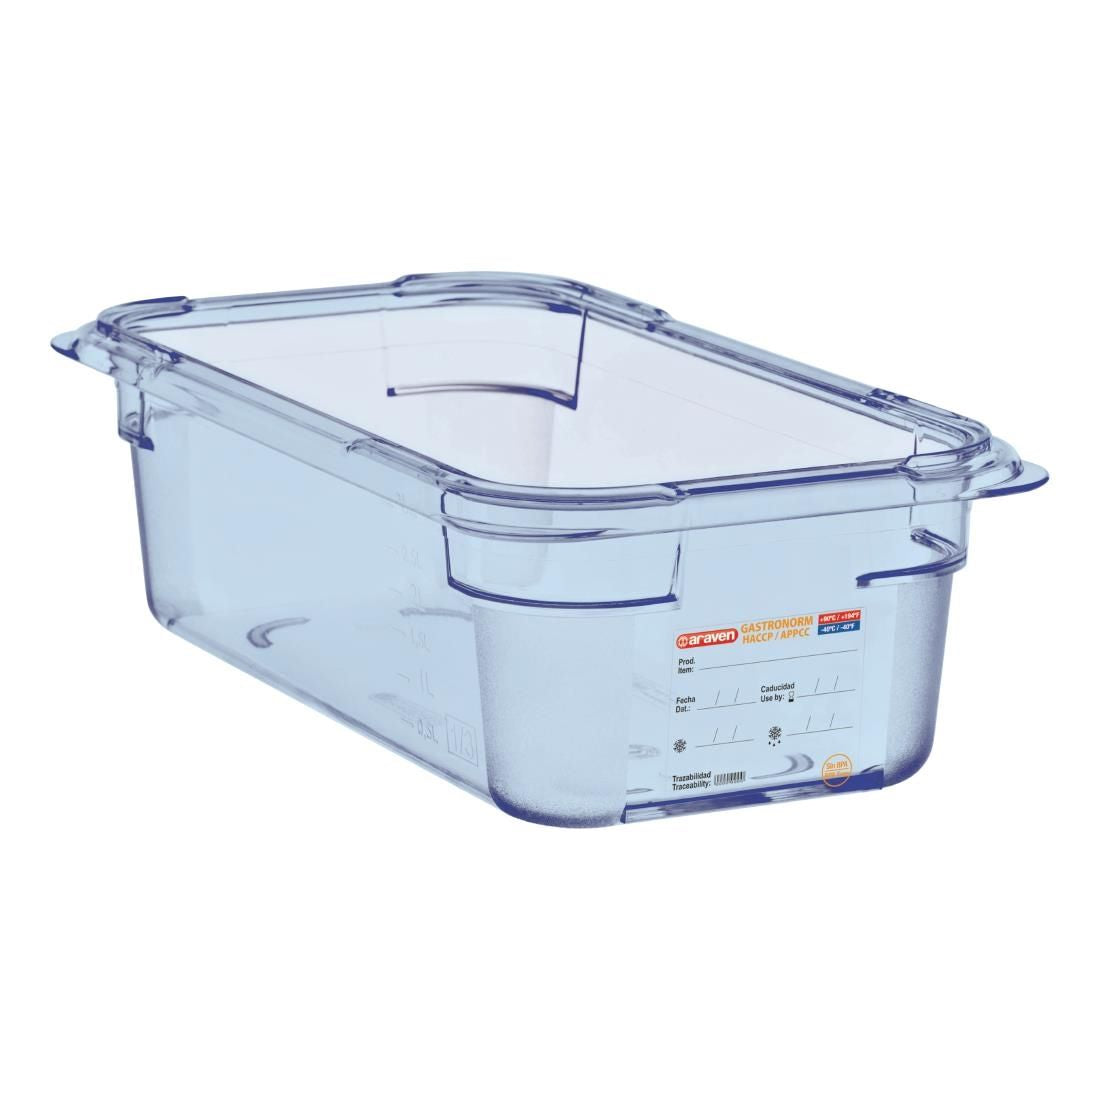 GP575 Araven ABS Food Storage Container Blue GN 1/4 100mm JD Catering Equipment Solutions Ltd